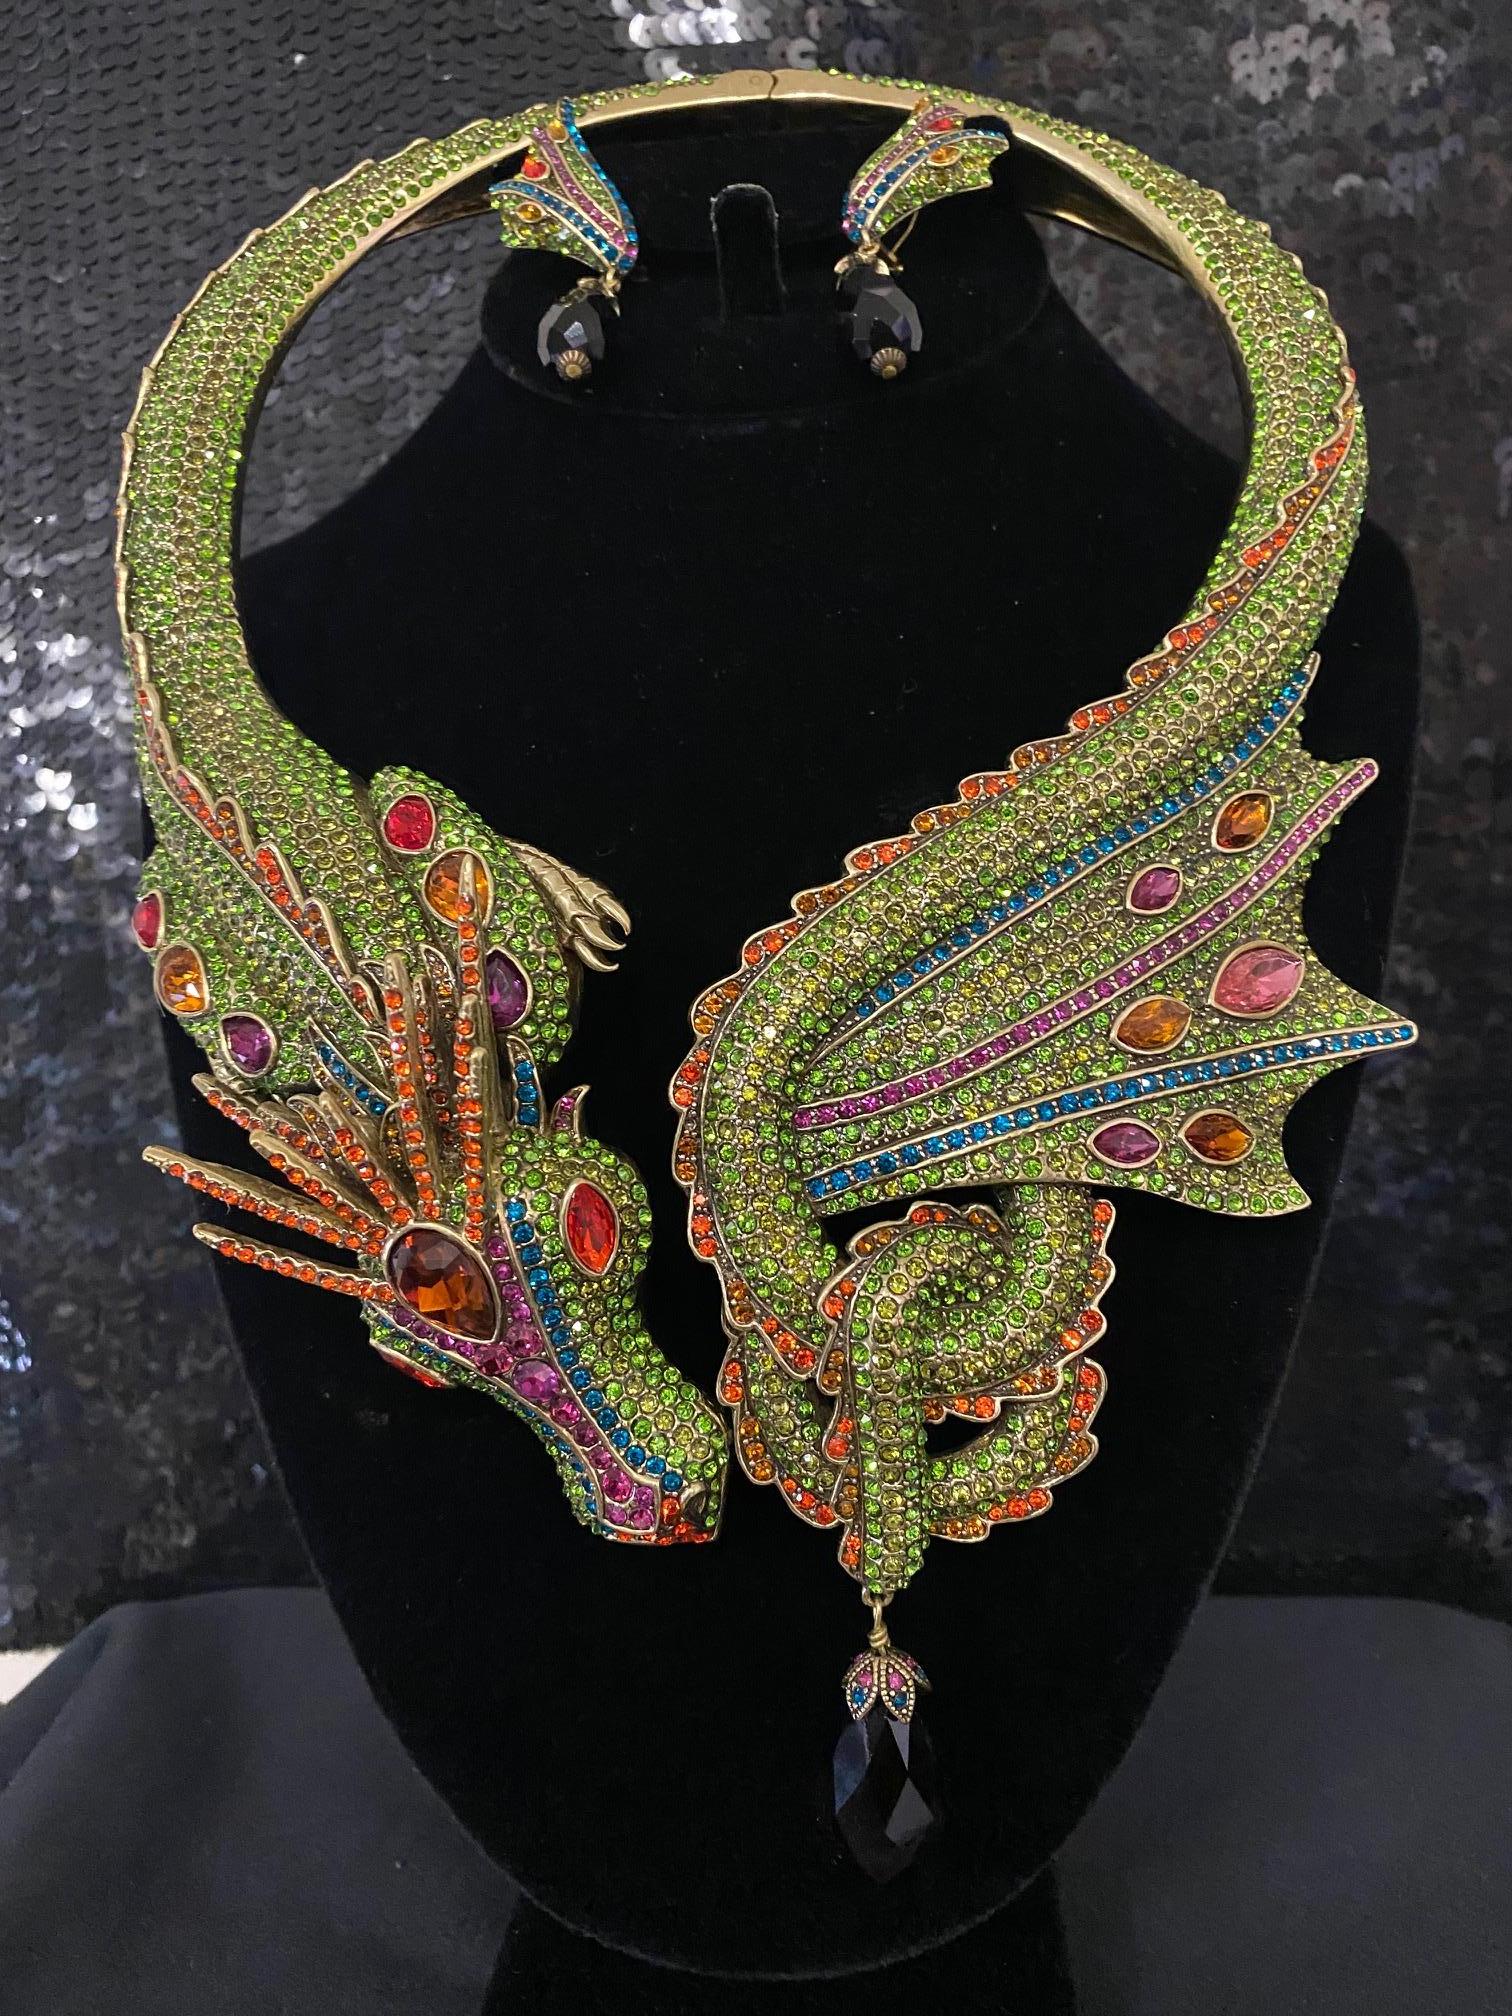 Modern Heidi Daus Mythical Masterpiece With 3000 Crystals Dragon Necklace & Earring Set